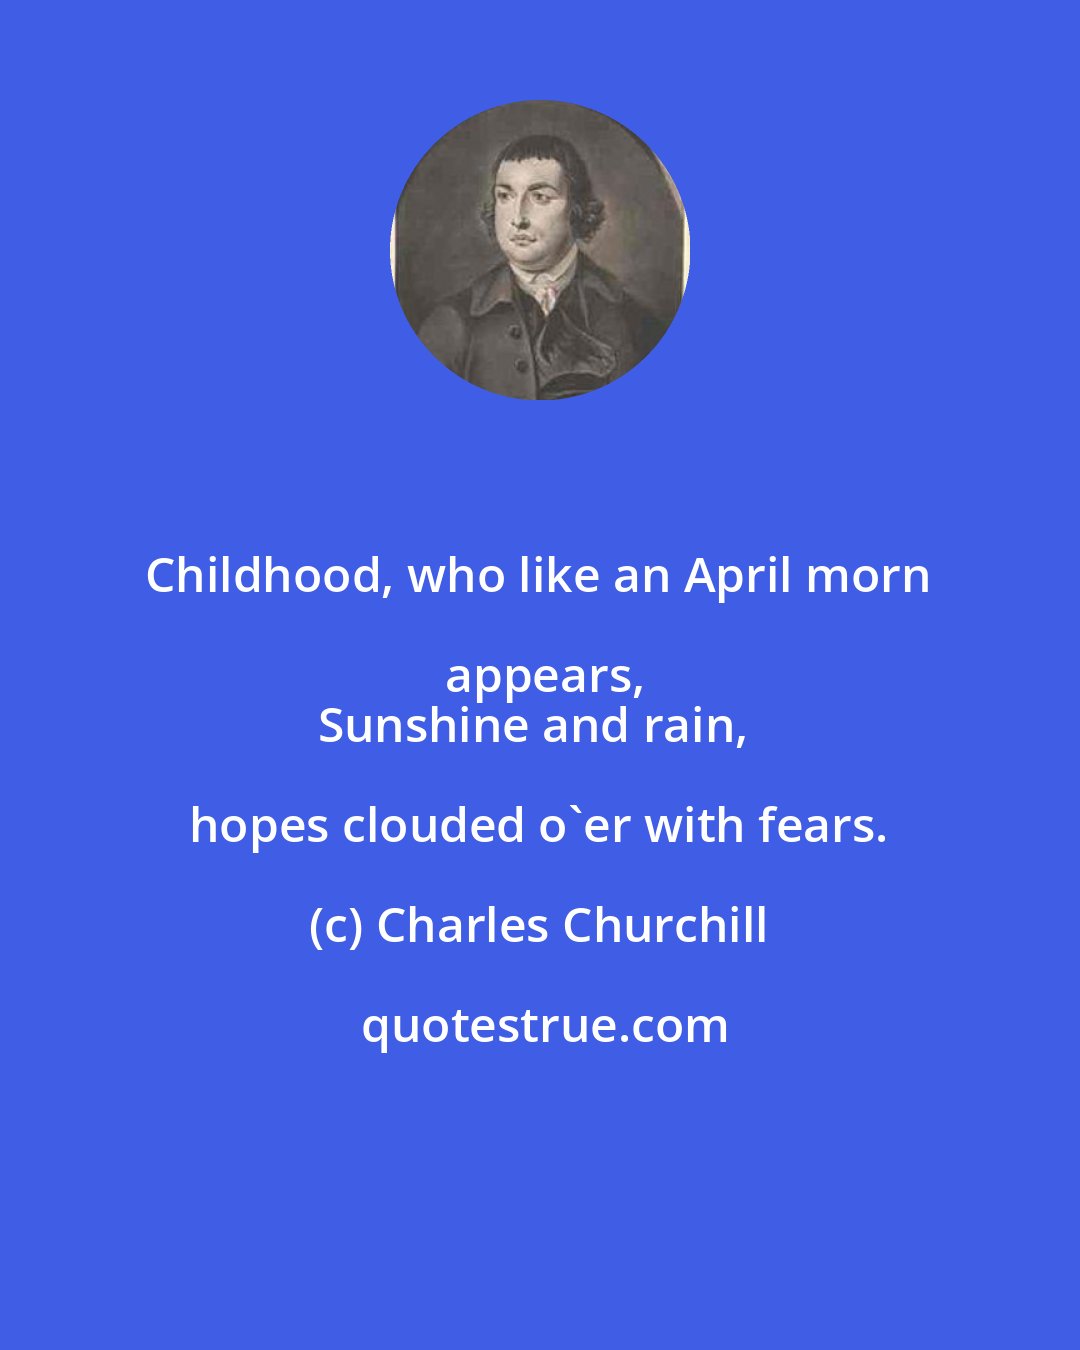 Charles Churchill: Childhood, who like an April morn appears,
Sunshine and rain, hopes clouded o'er with fears.